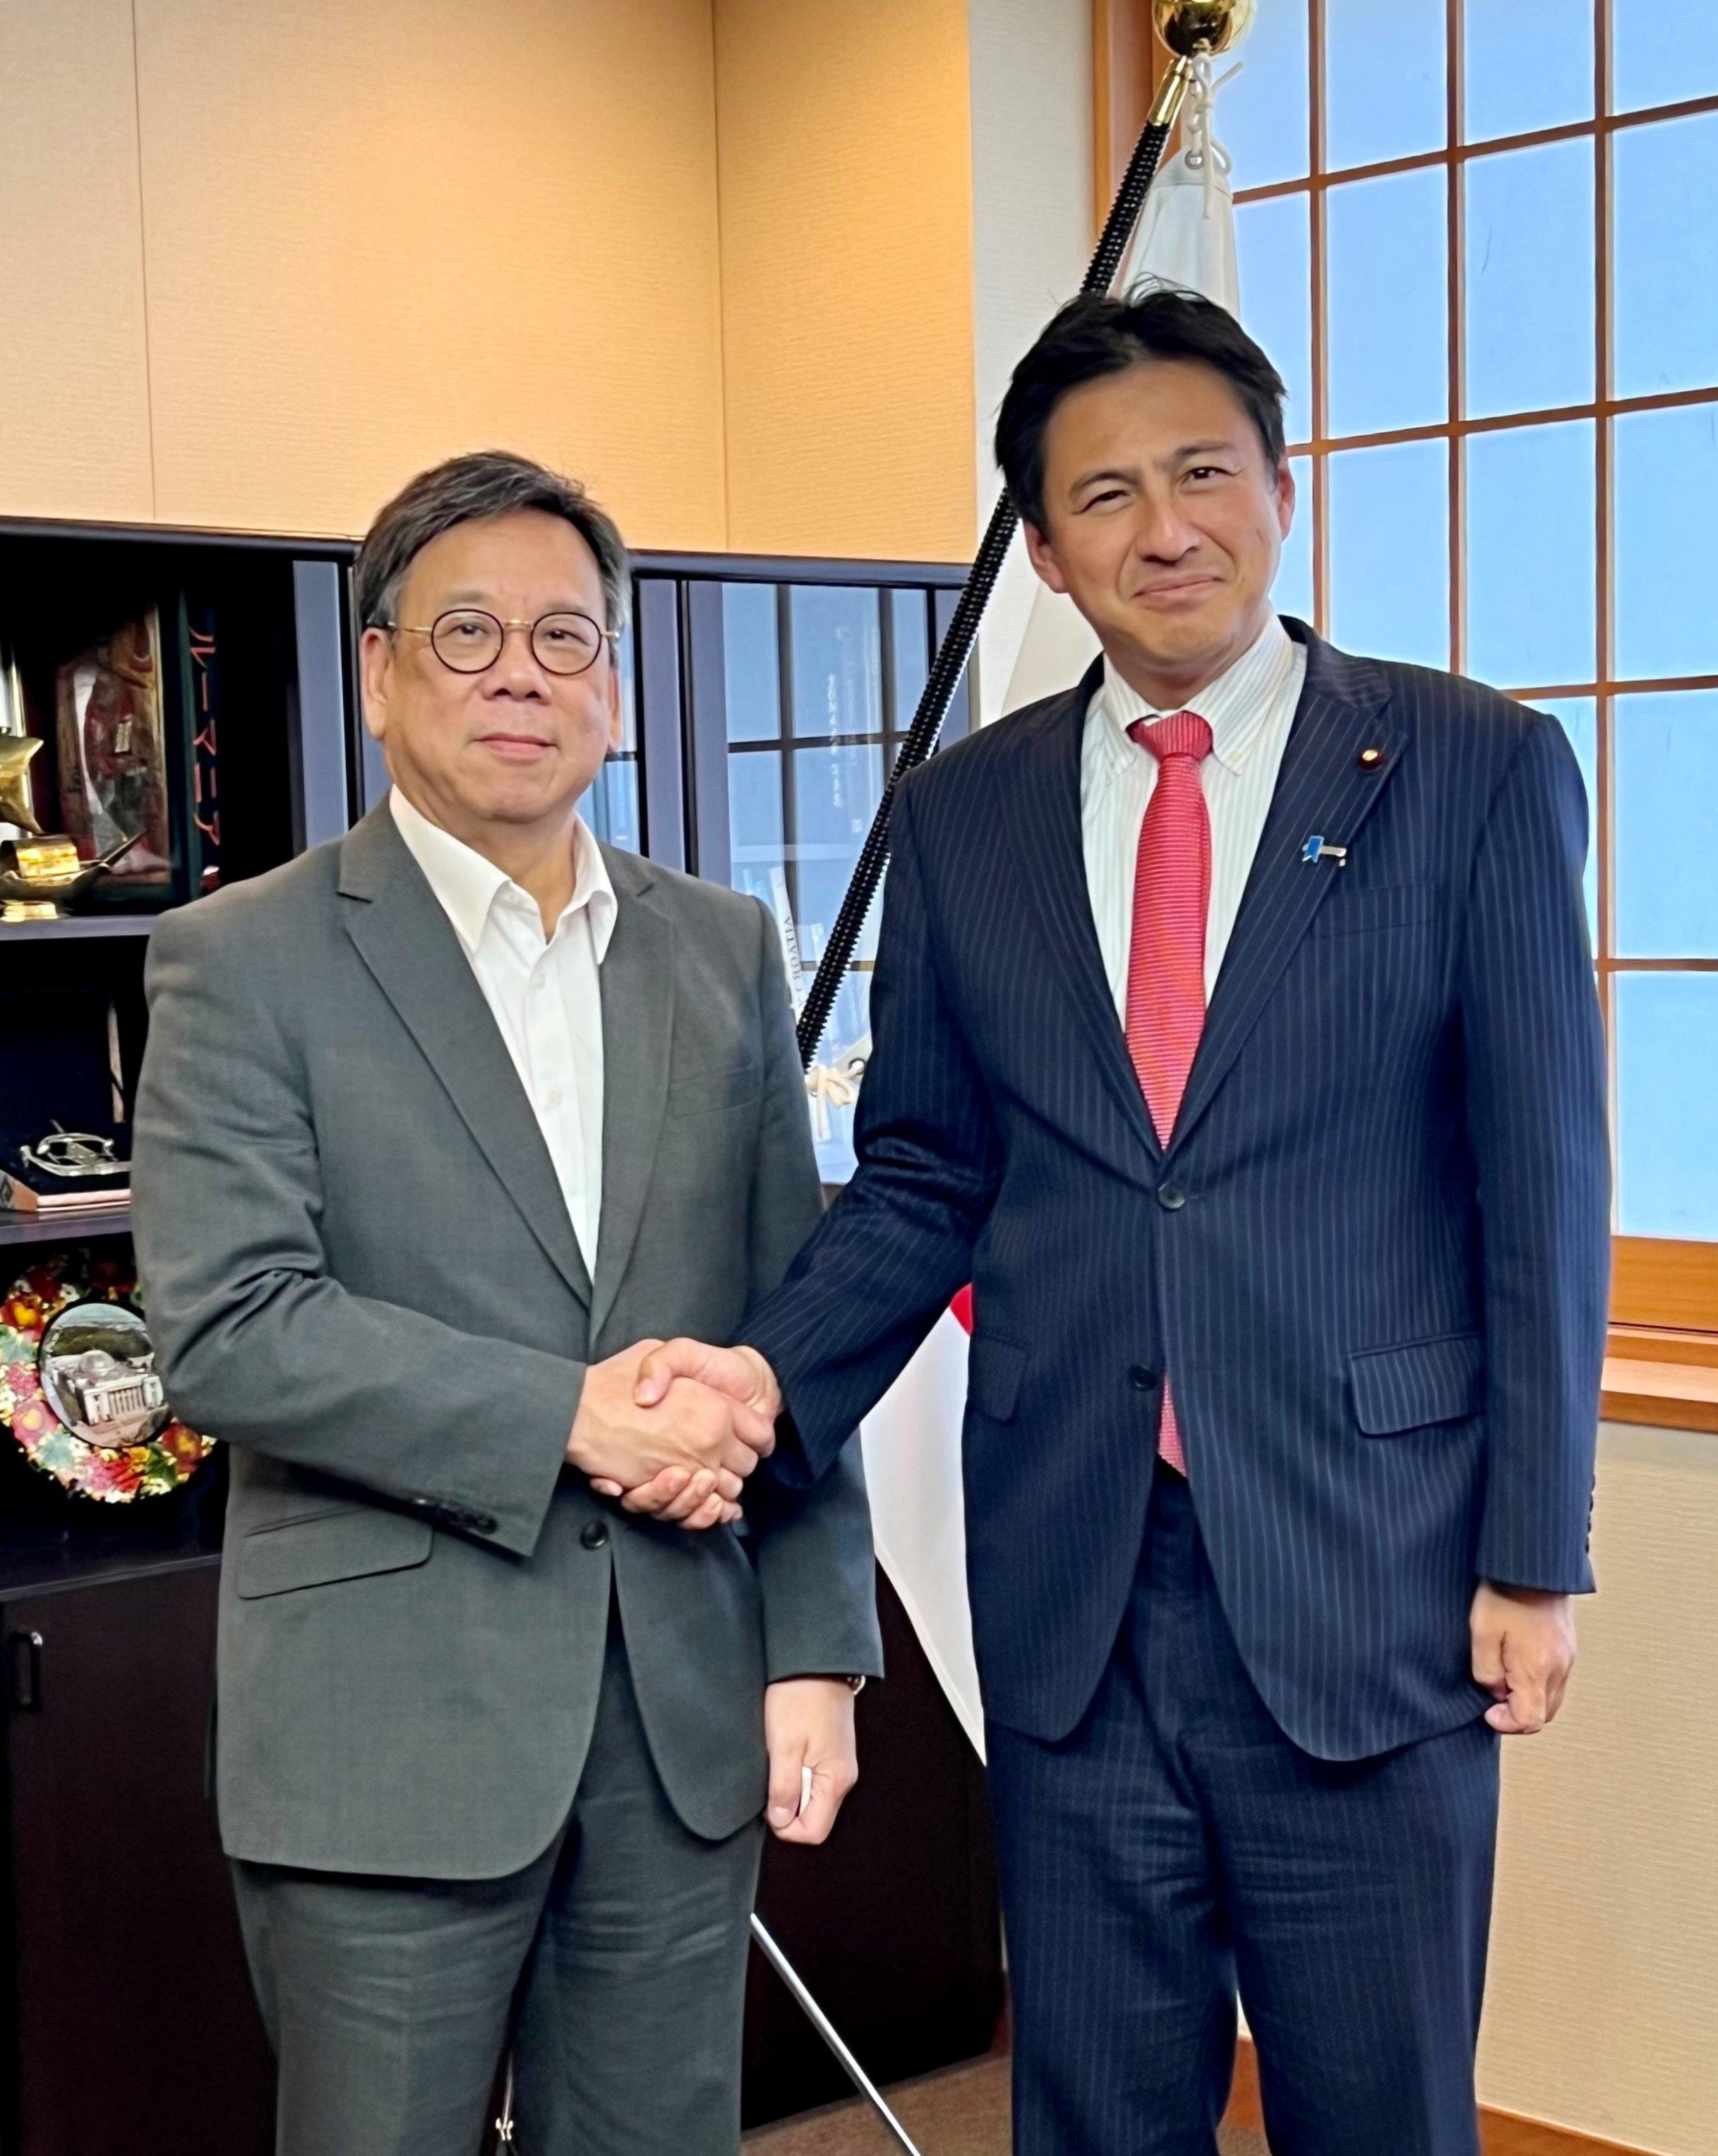 The Secretary for Commerce and Economic Development, Mr Algernon Yau (left), meets with State Minister for Foreign Affairs of Japan Mr Shunsuke Takei (right) in Tokyo, Japan, today (June 20) to exchange views on trade and economic co-operation as well as issues of mutual concern.